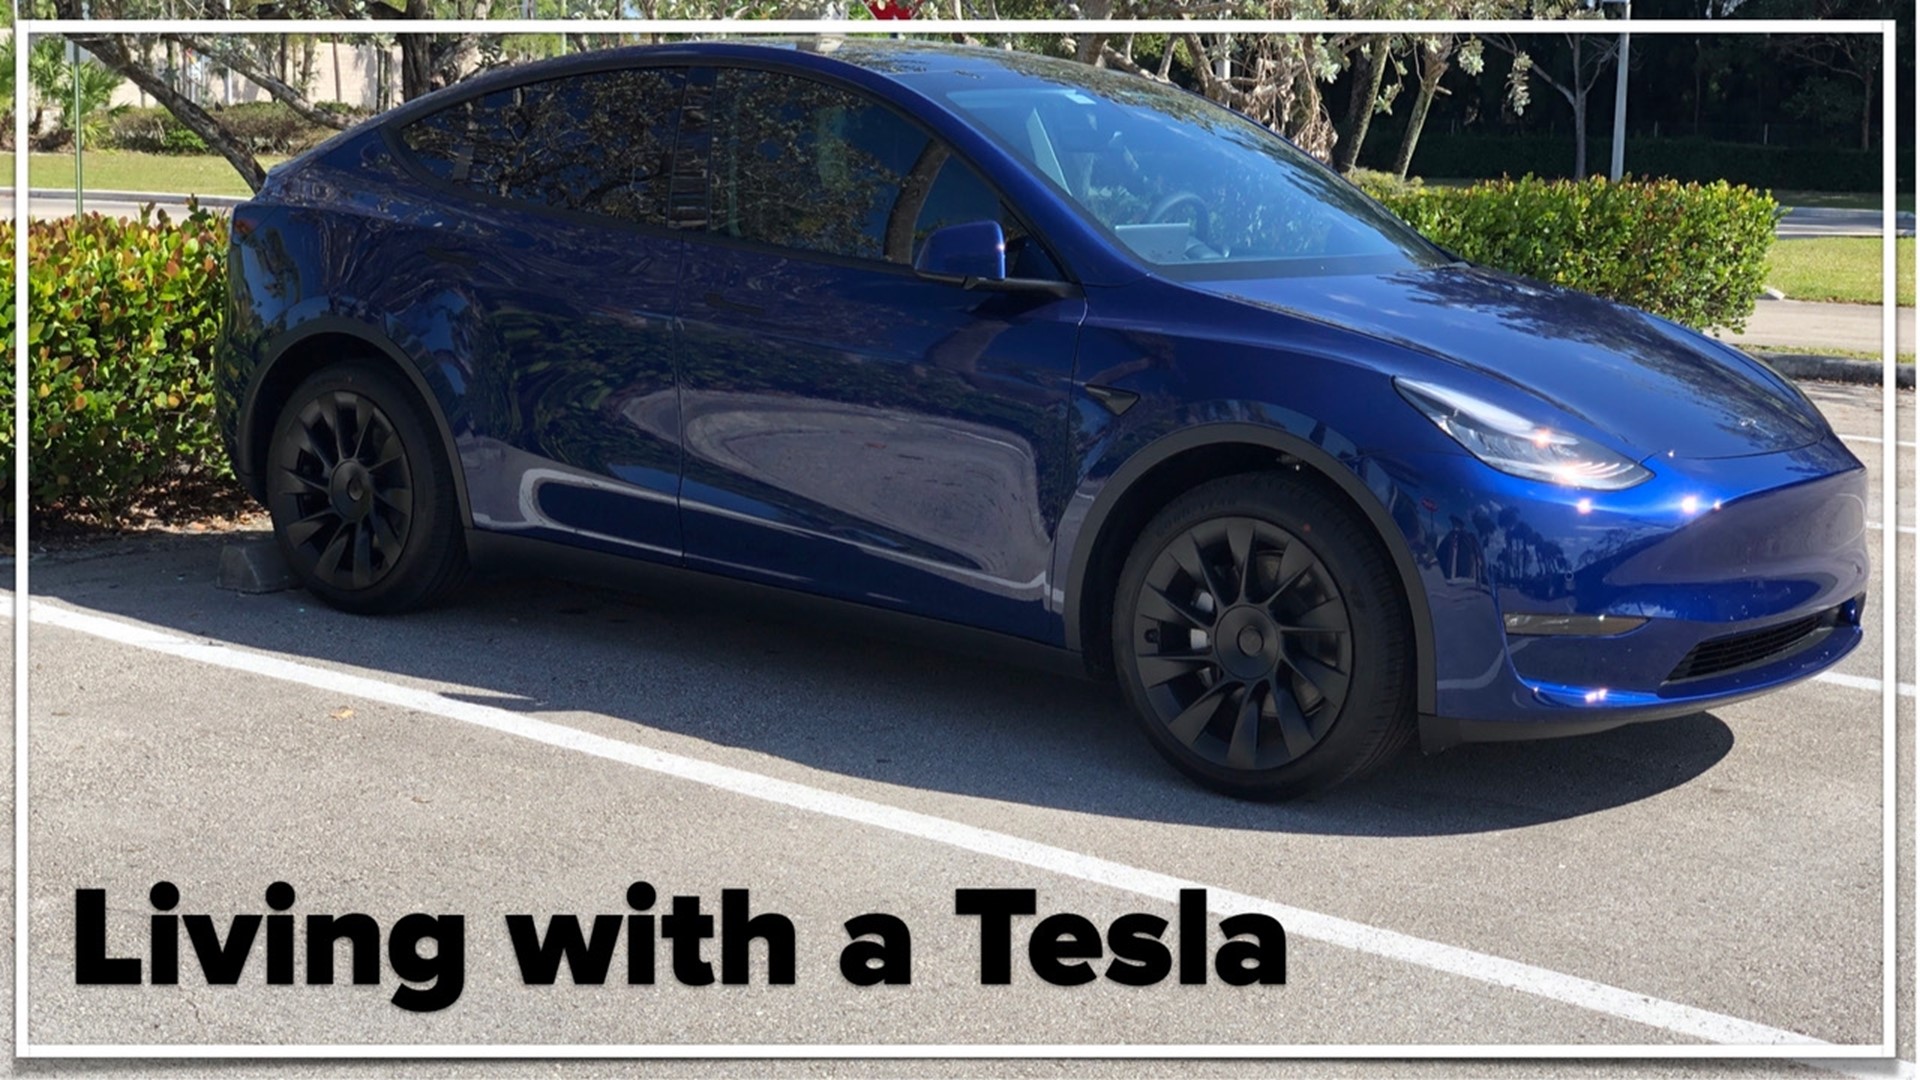 We talk to two Tesla owners about their experiences, take a look at the mid-size pickup market and give some tips about avoiding flood damaged cars